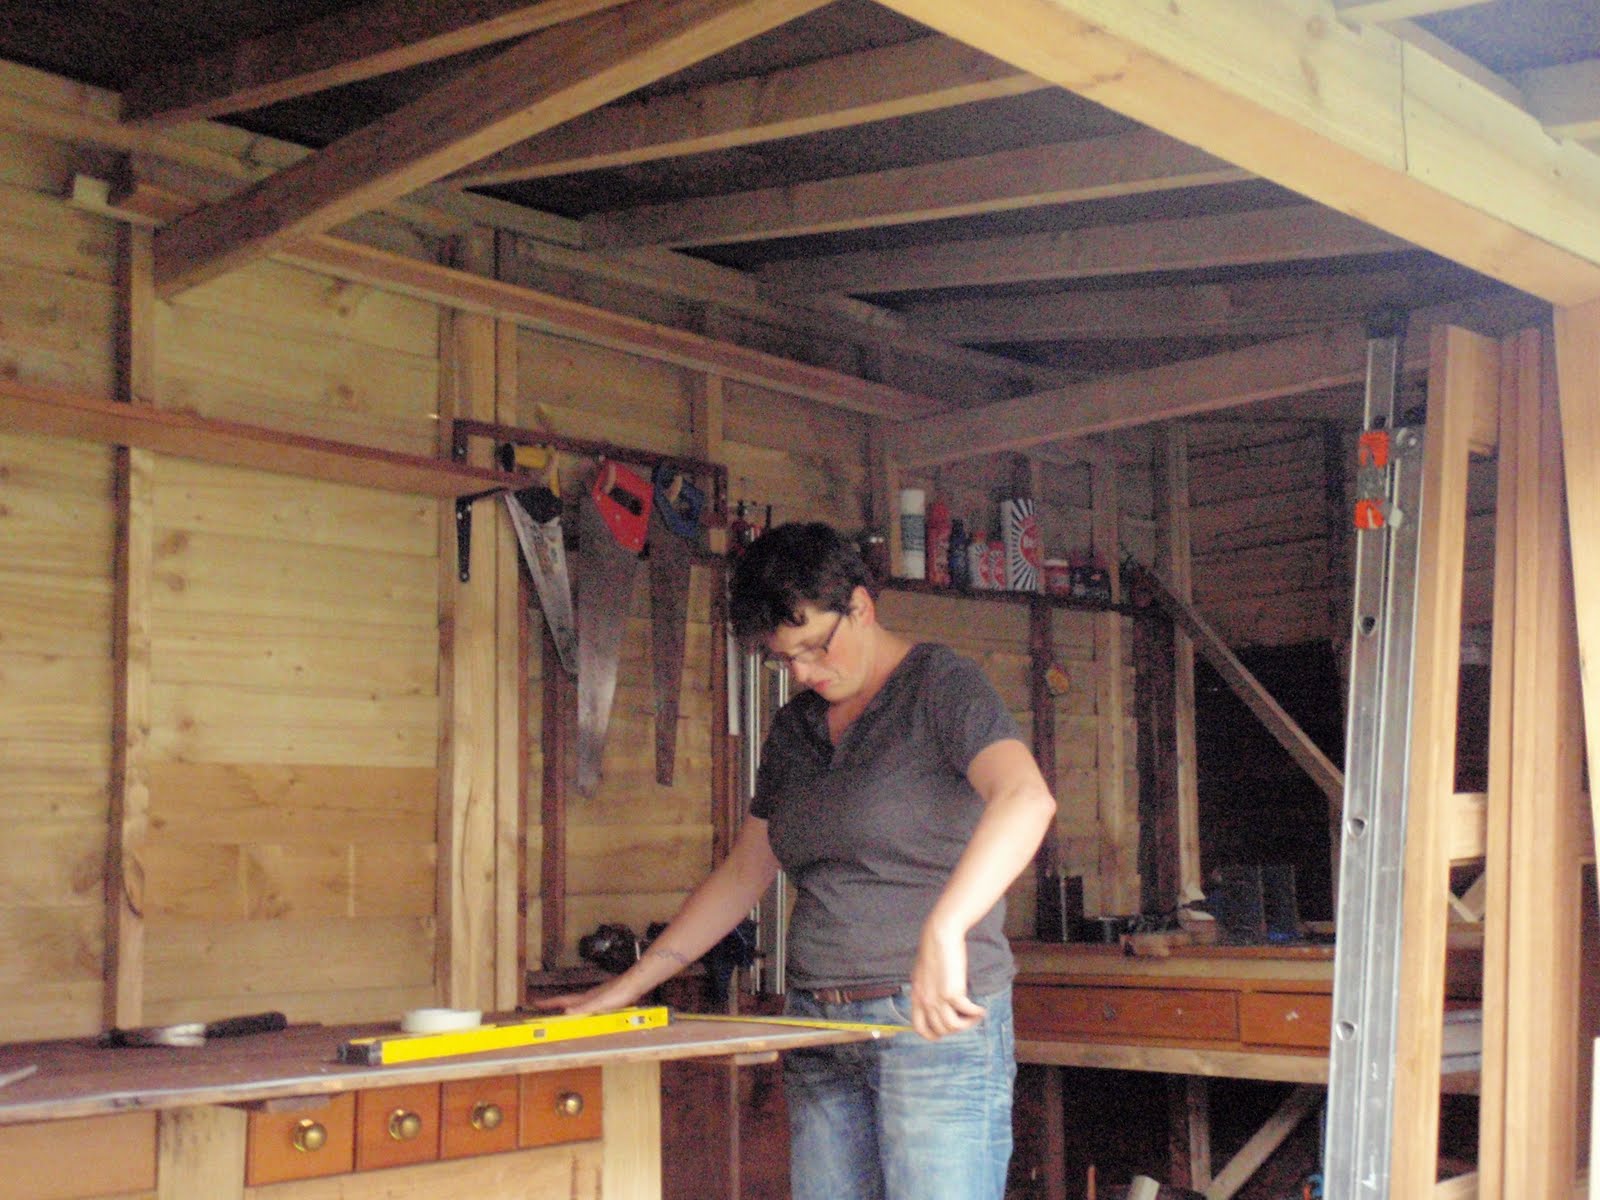 My workshop: Finishing off the tool shed door